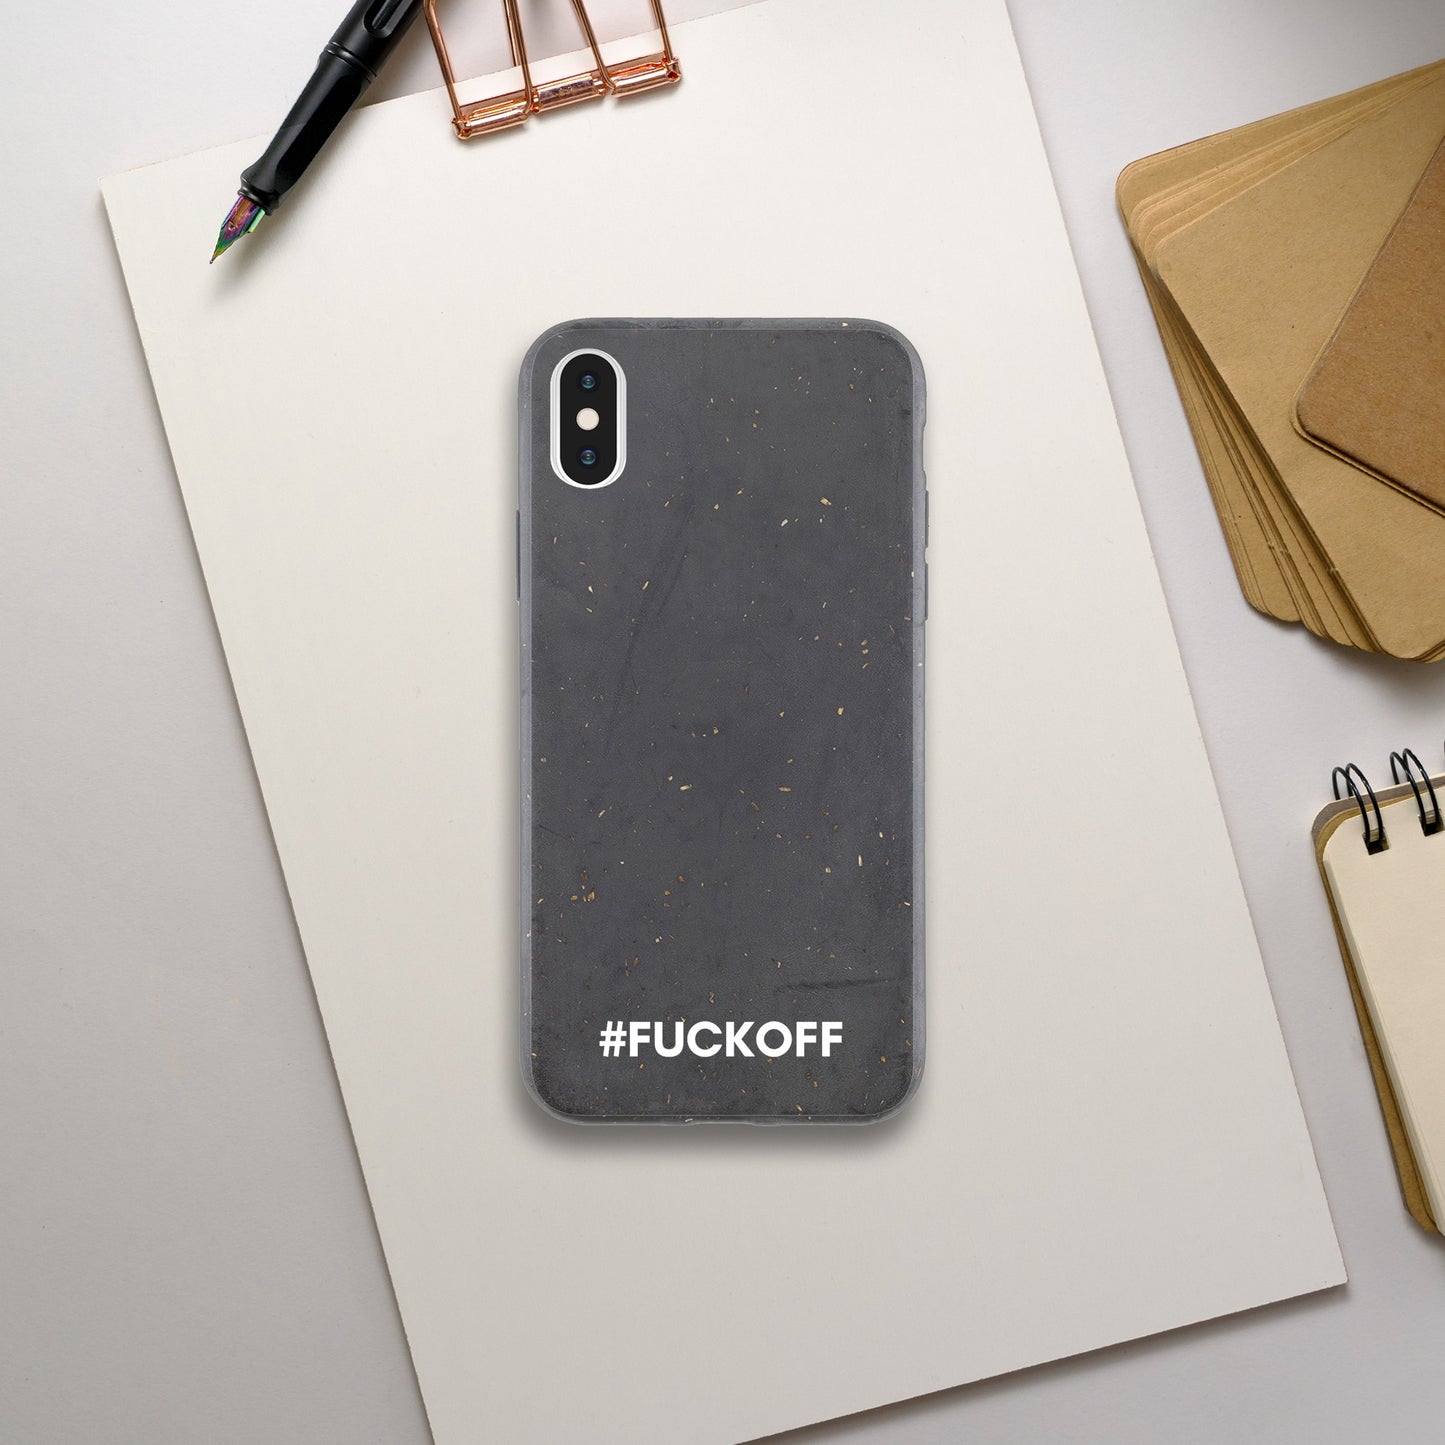 Cranky? Try this biodegradable phone case.